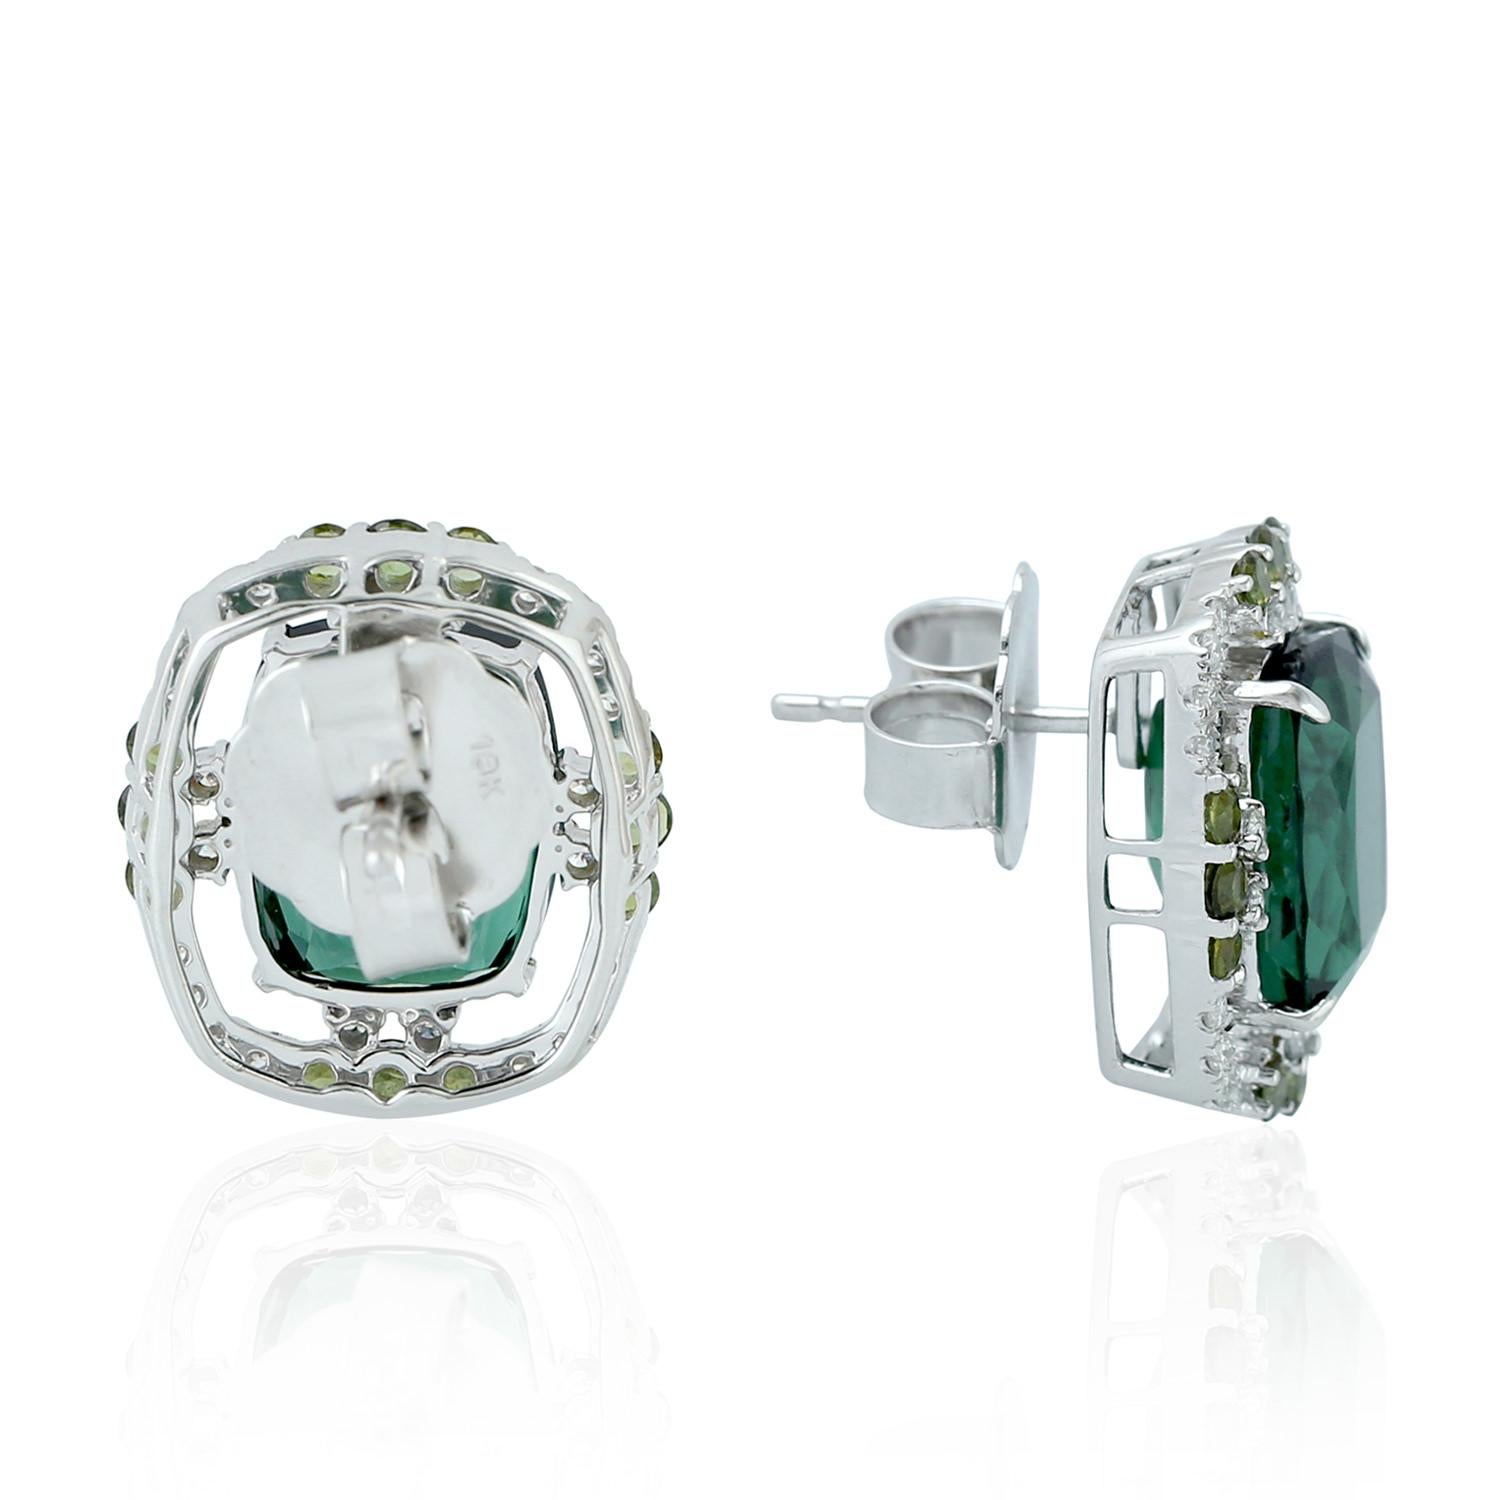 Contemporary 10.55 ct Green Tourmaline Studs With Diamonds Made In 18k White Gold For Sale